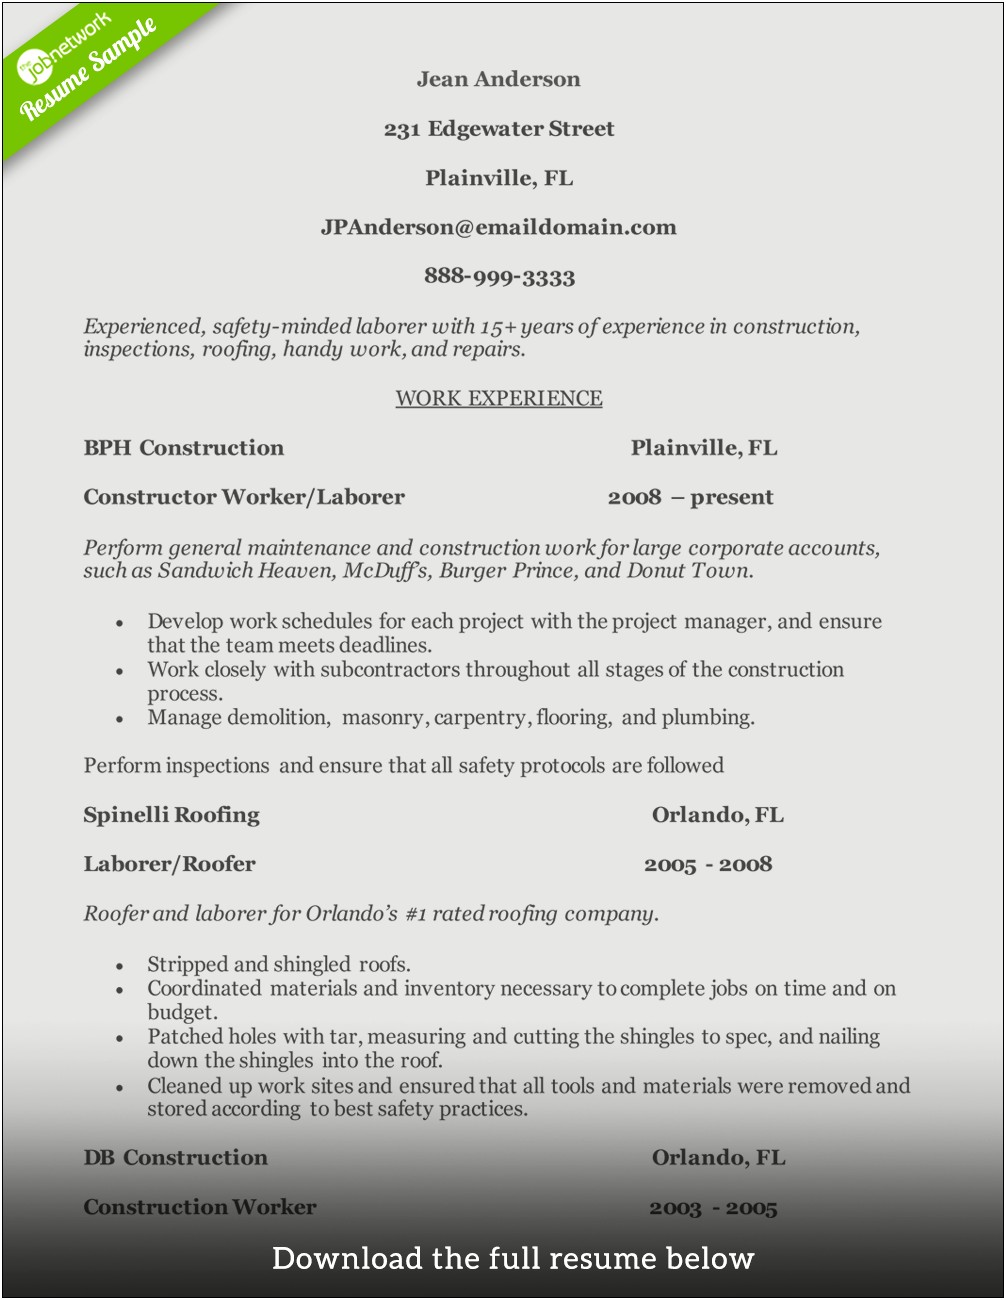 Resume Sample For Construction Company